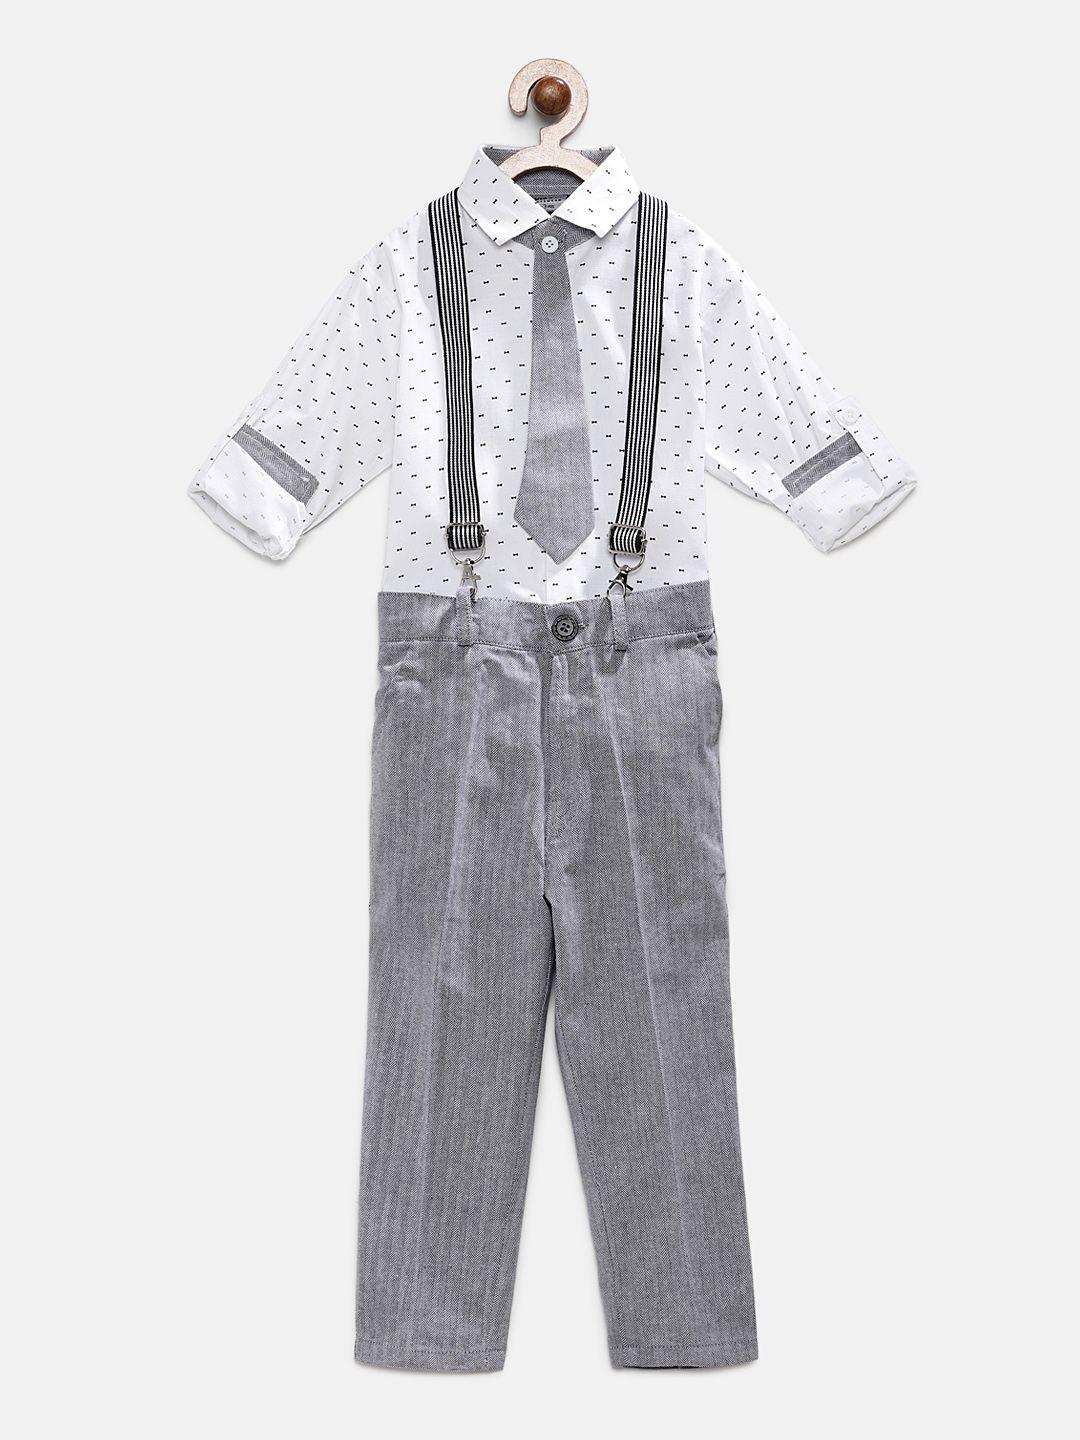 rikidoos-boys-white-&-grey-pure-cotton-printed-shirt-&-trousers-with-tie-&-suspenders